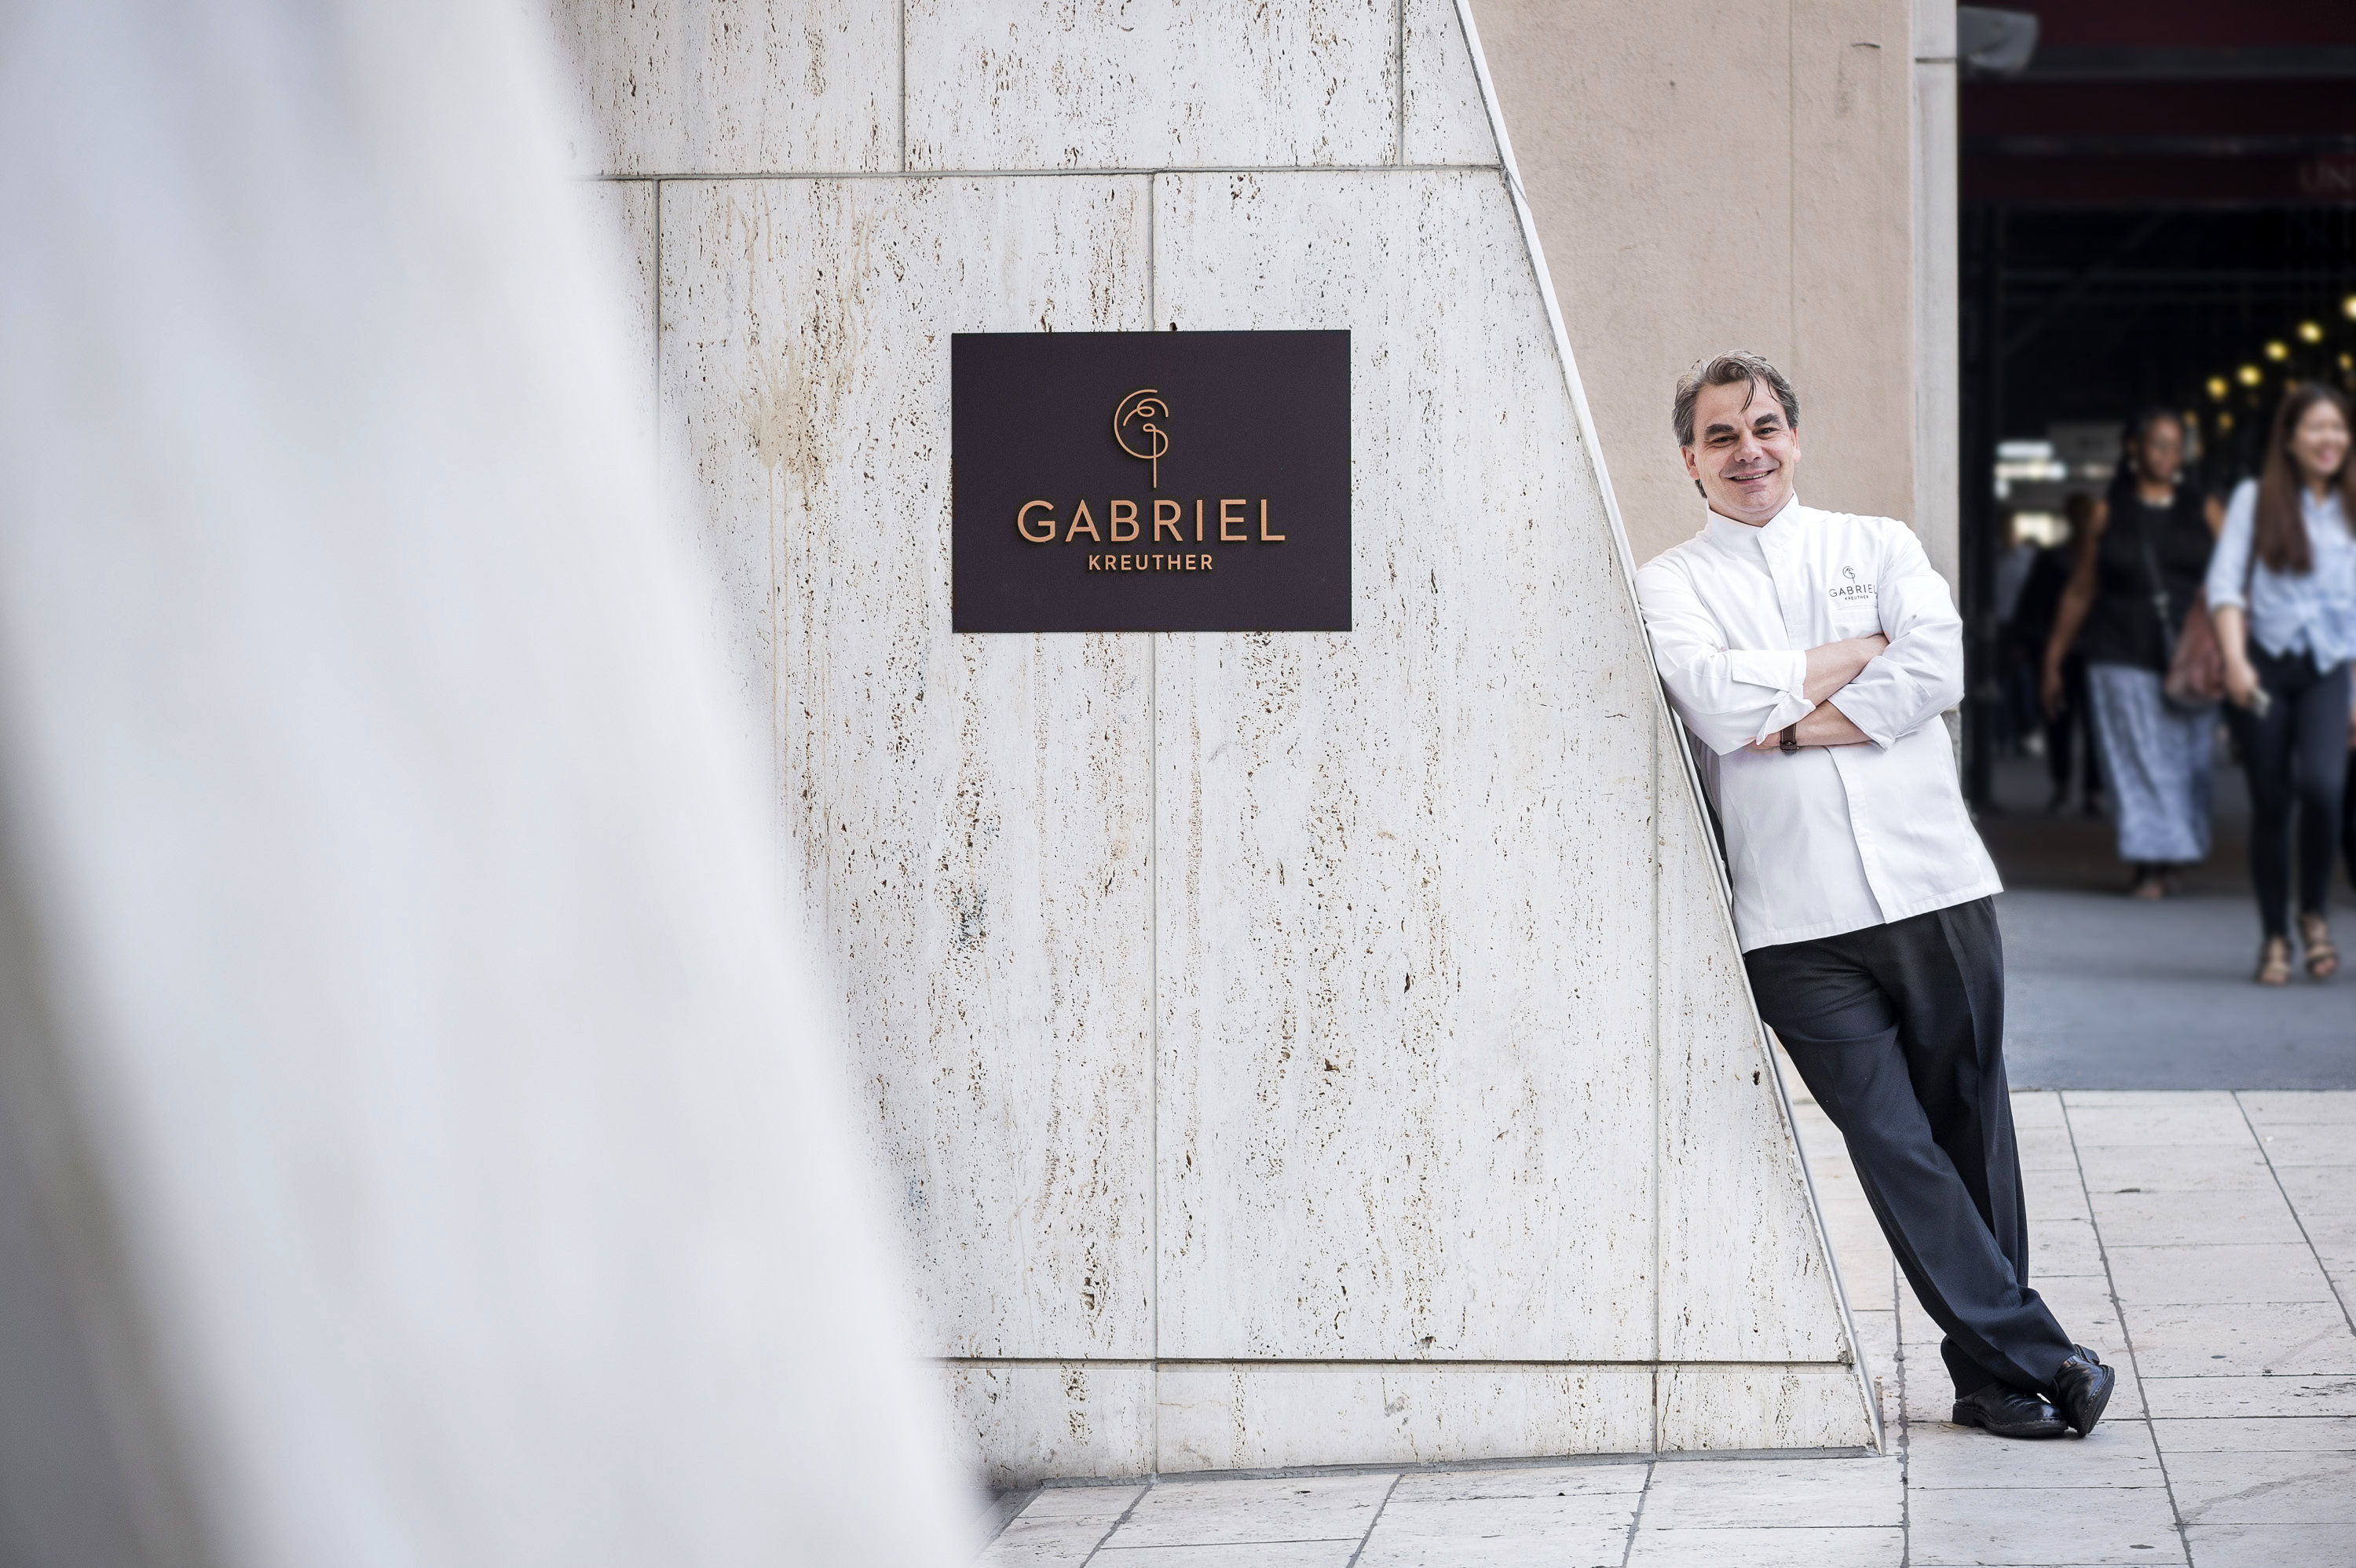 Gabriel Kreuther, outside his eponymous restaurant. (photo by Evan Sung)